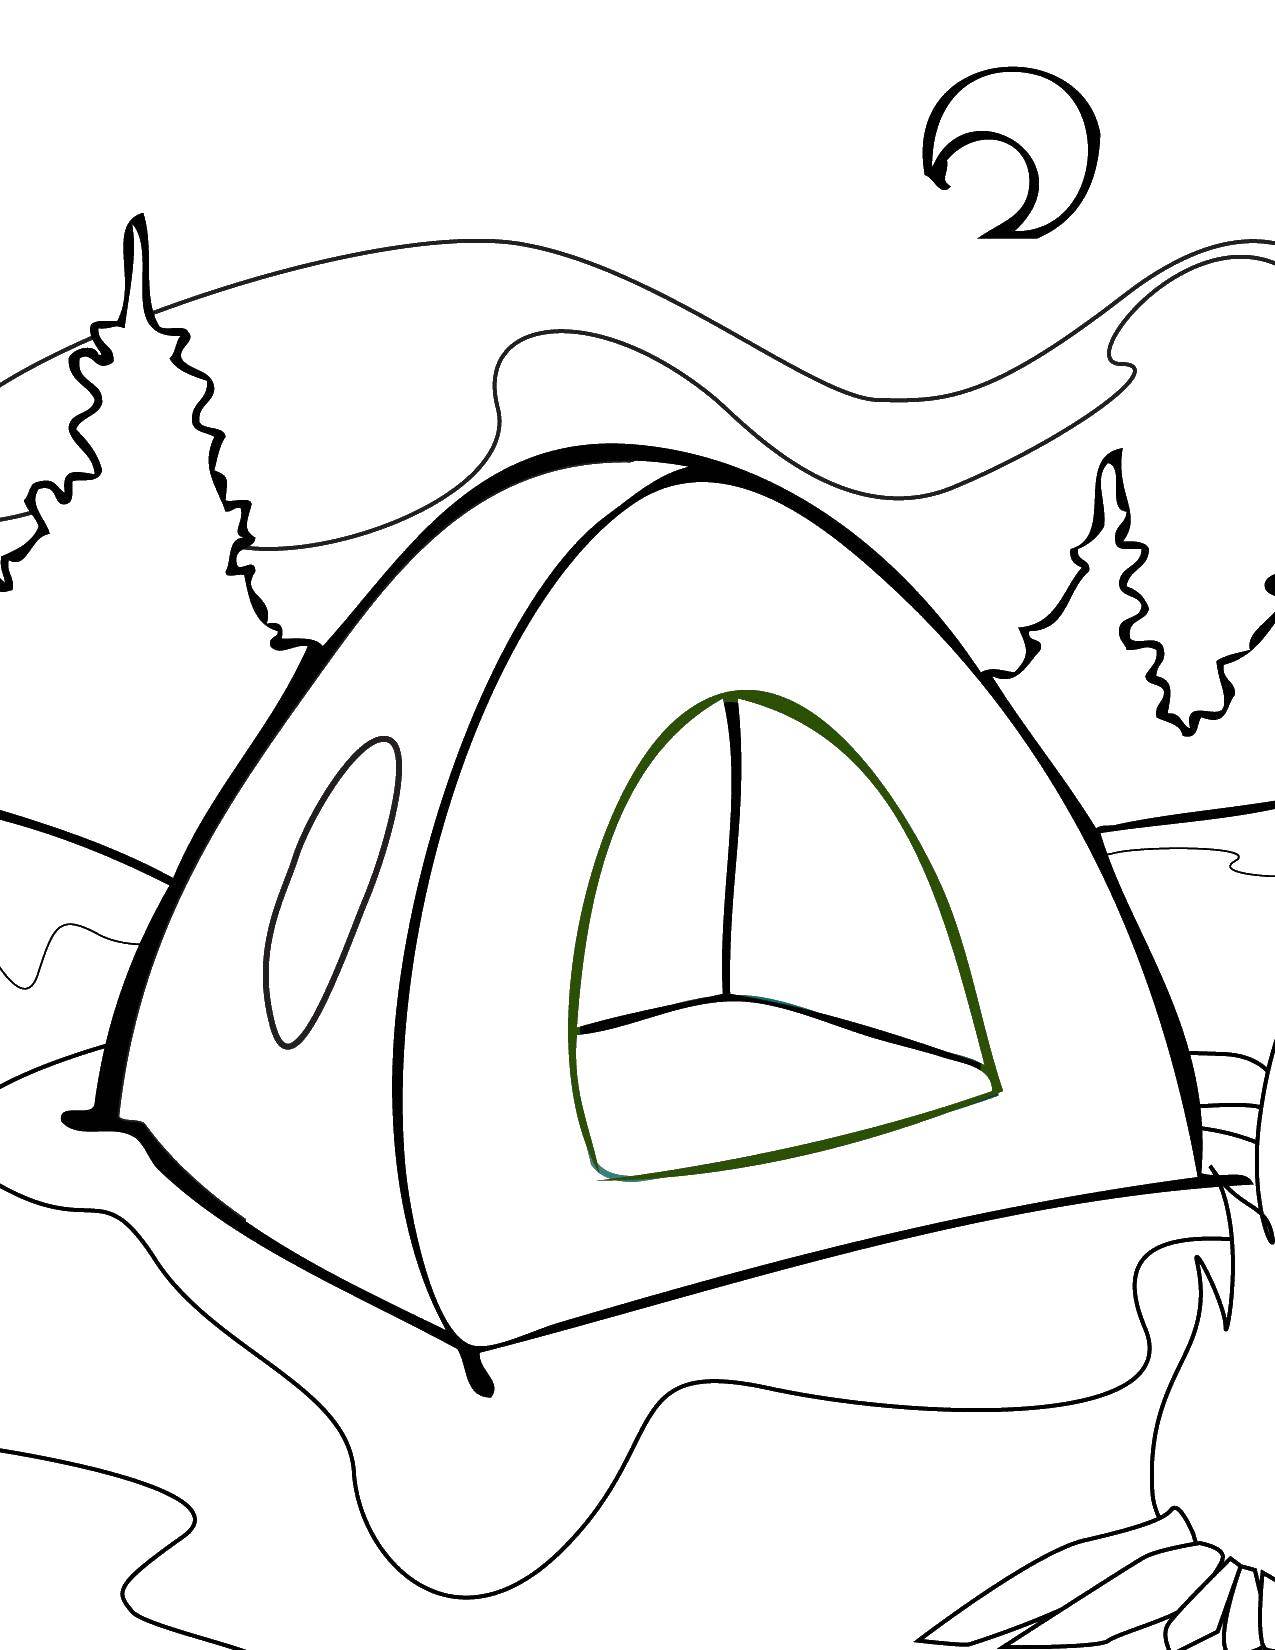 Coloring Tent. Category Camping. Tags:  tent.